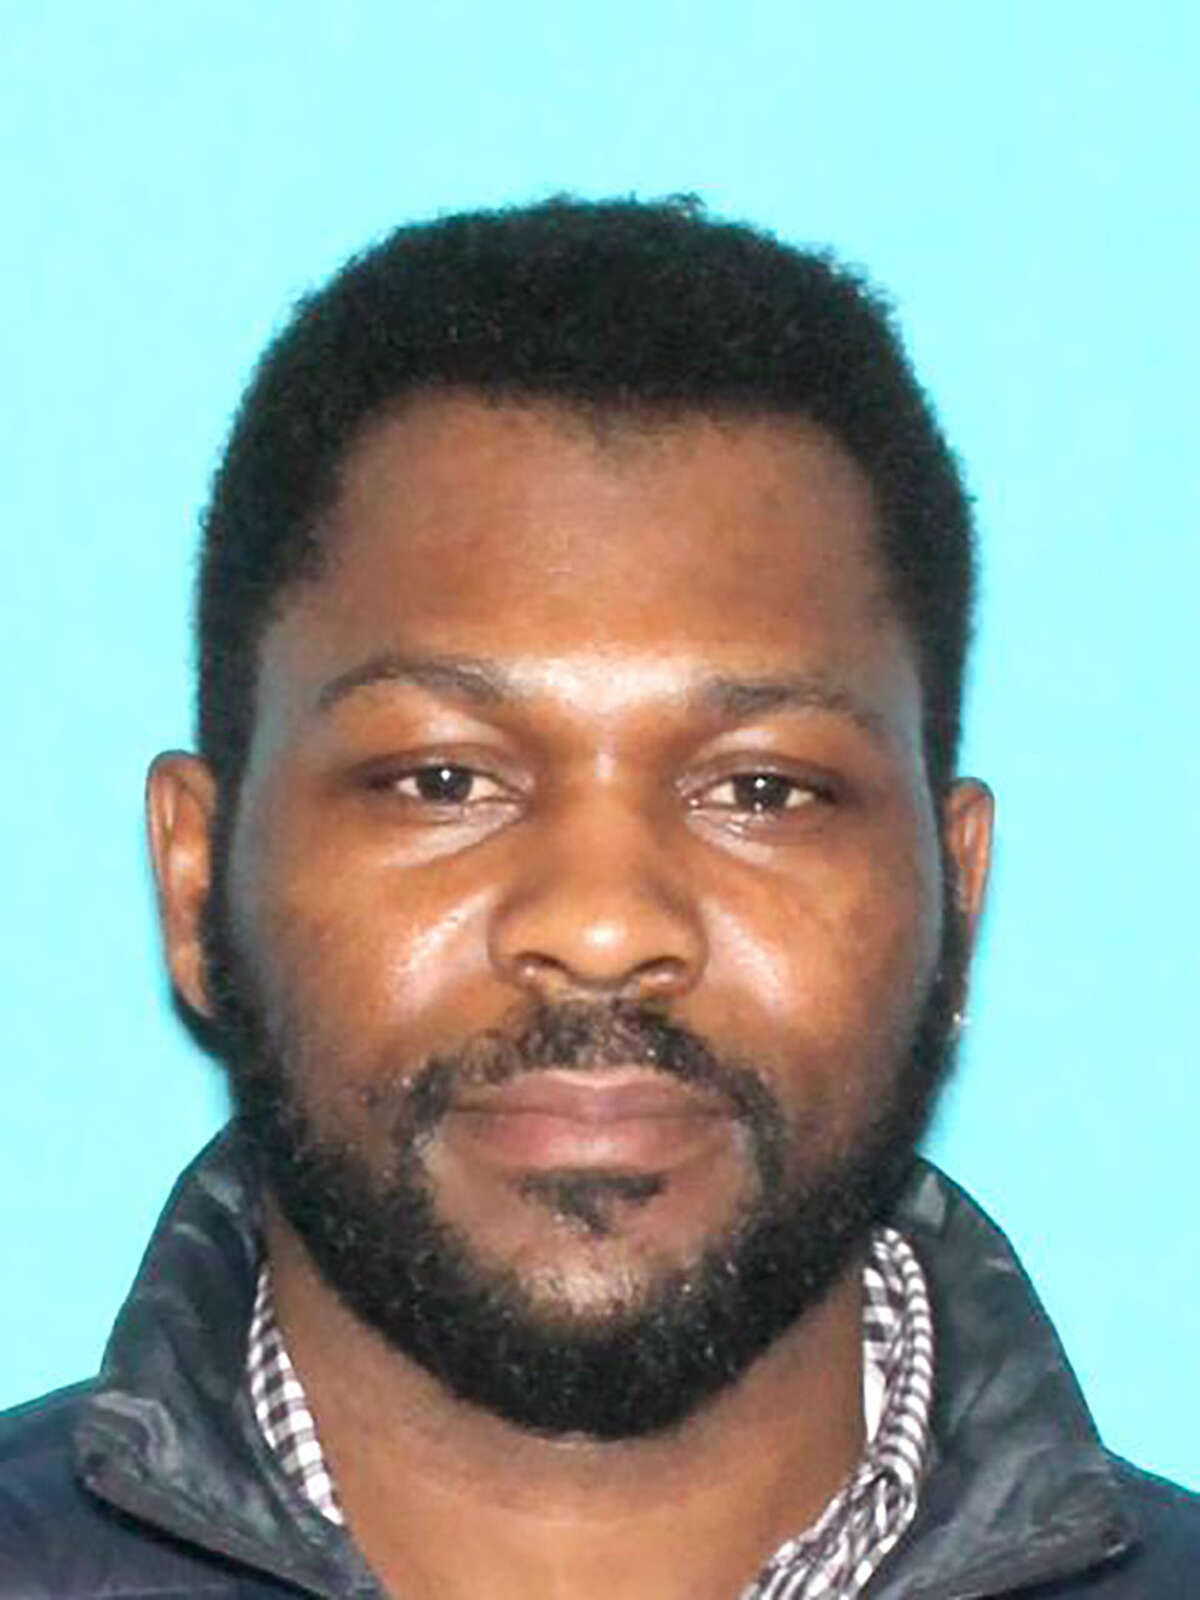 Police are searching for 36-year-old Leroy Headley in connection to a South Burlington, Vermont, homicide. Police believe Headley killed the woman he lived with on May 3. Just over two weeks later, his car was found abandoned on Sherman Street in Albany, N.Y.